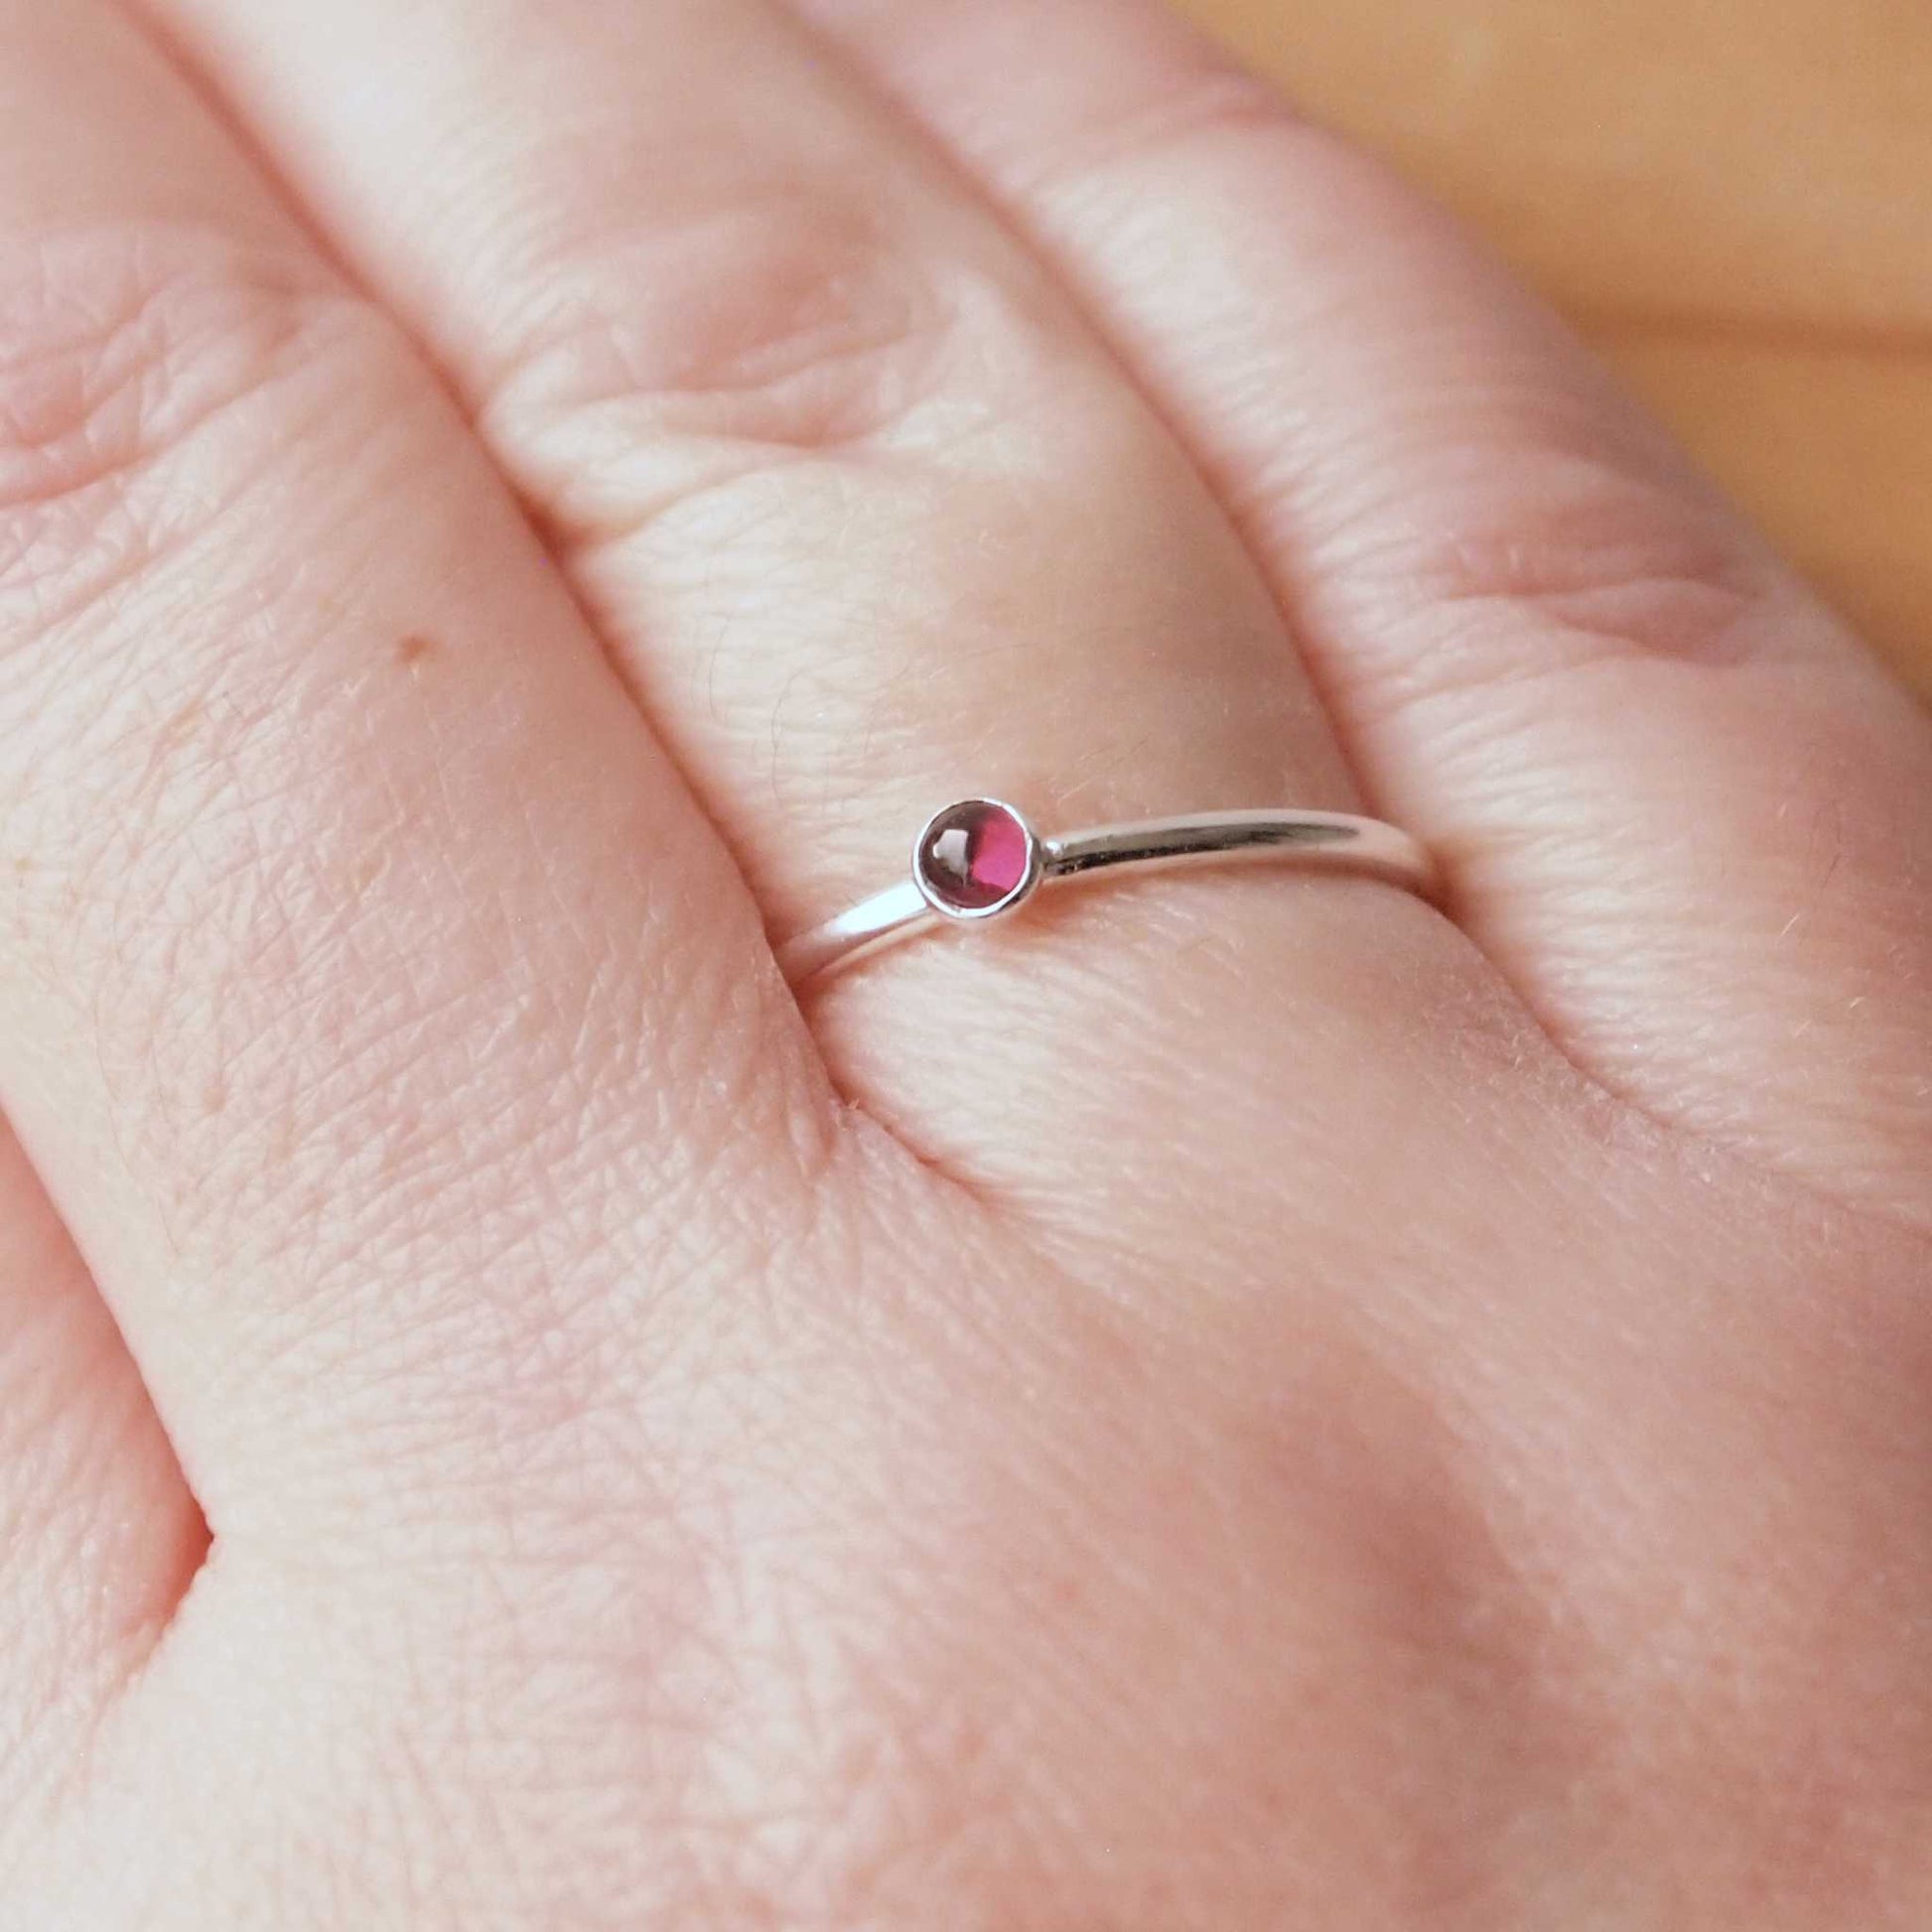 Small Garnet gemstone ring in sterling silver with a modern round band with a 3mm sized round dark red garnet, which is the birthstone for January. Handmade in Edinburgh by Maram Jewellery